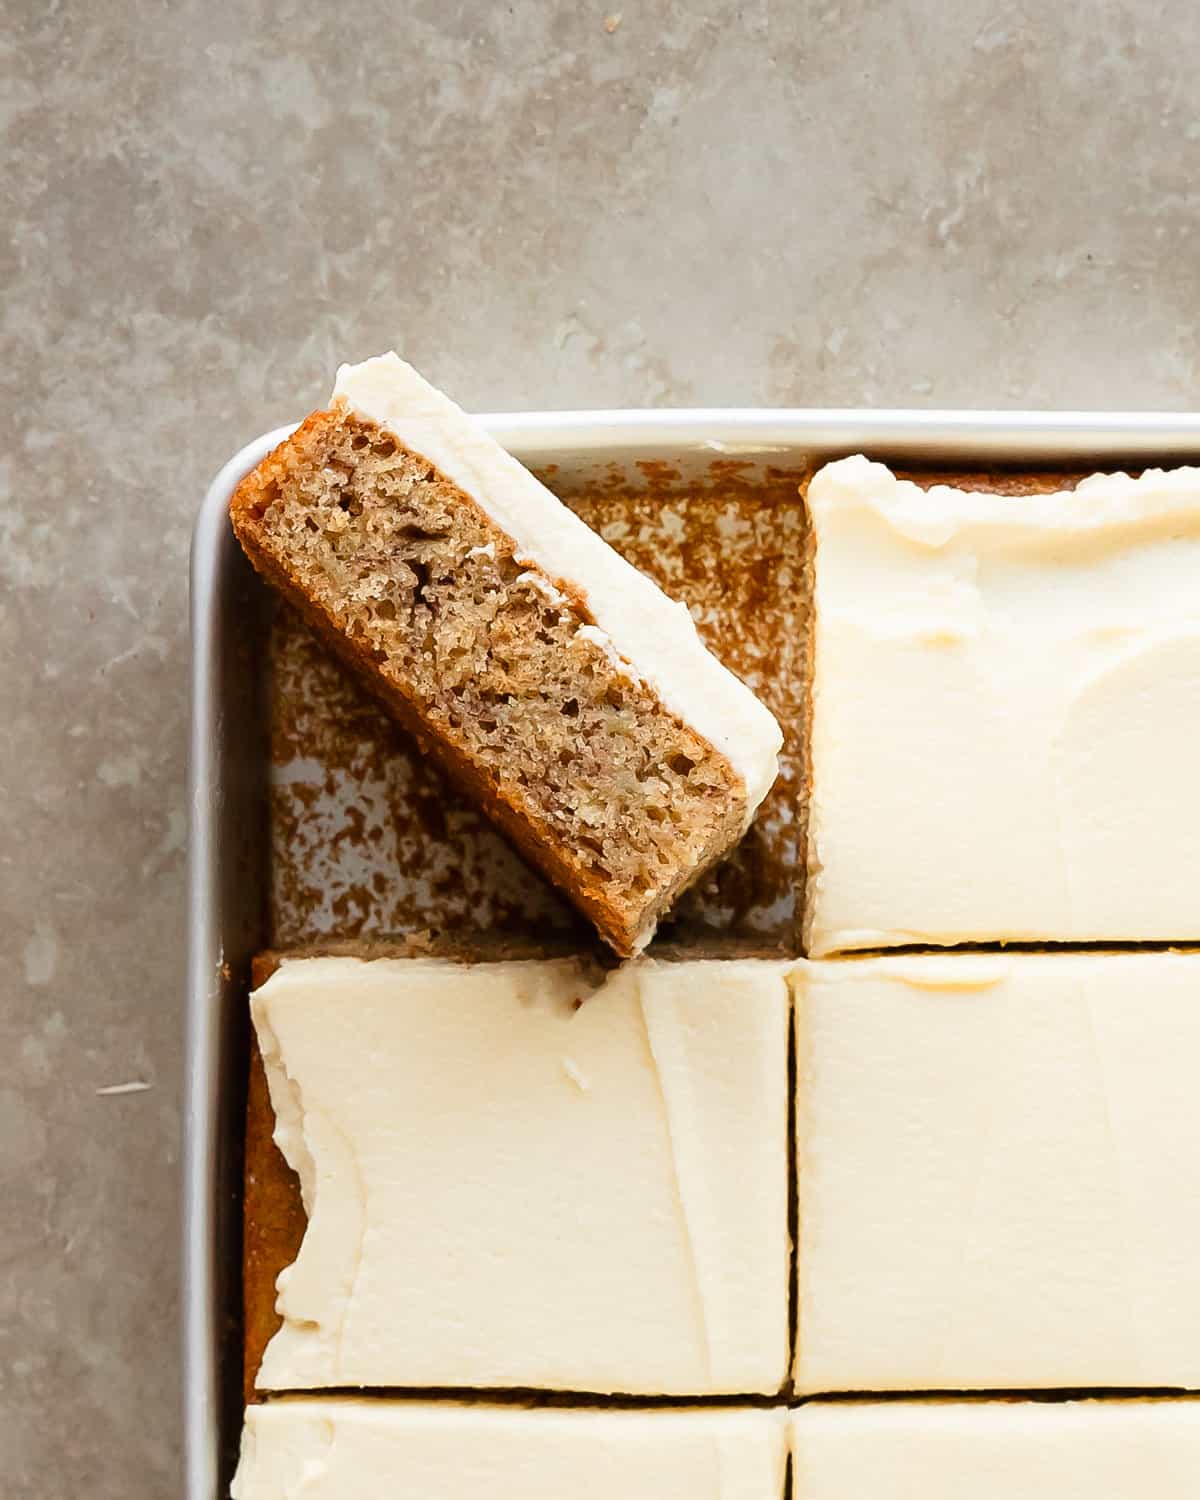 Banana bars with cream cheese frosting are soft, moist and flavorful banana cake bars; topped with a rich and sweet cream cheese frosting. Grab two bowls and a whisk to make this sheet cake banana bars recipe the next time you need a quick and easy dessert that everyone is sure to love!